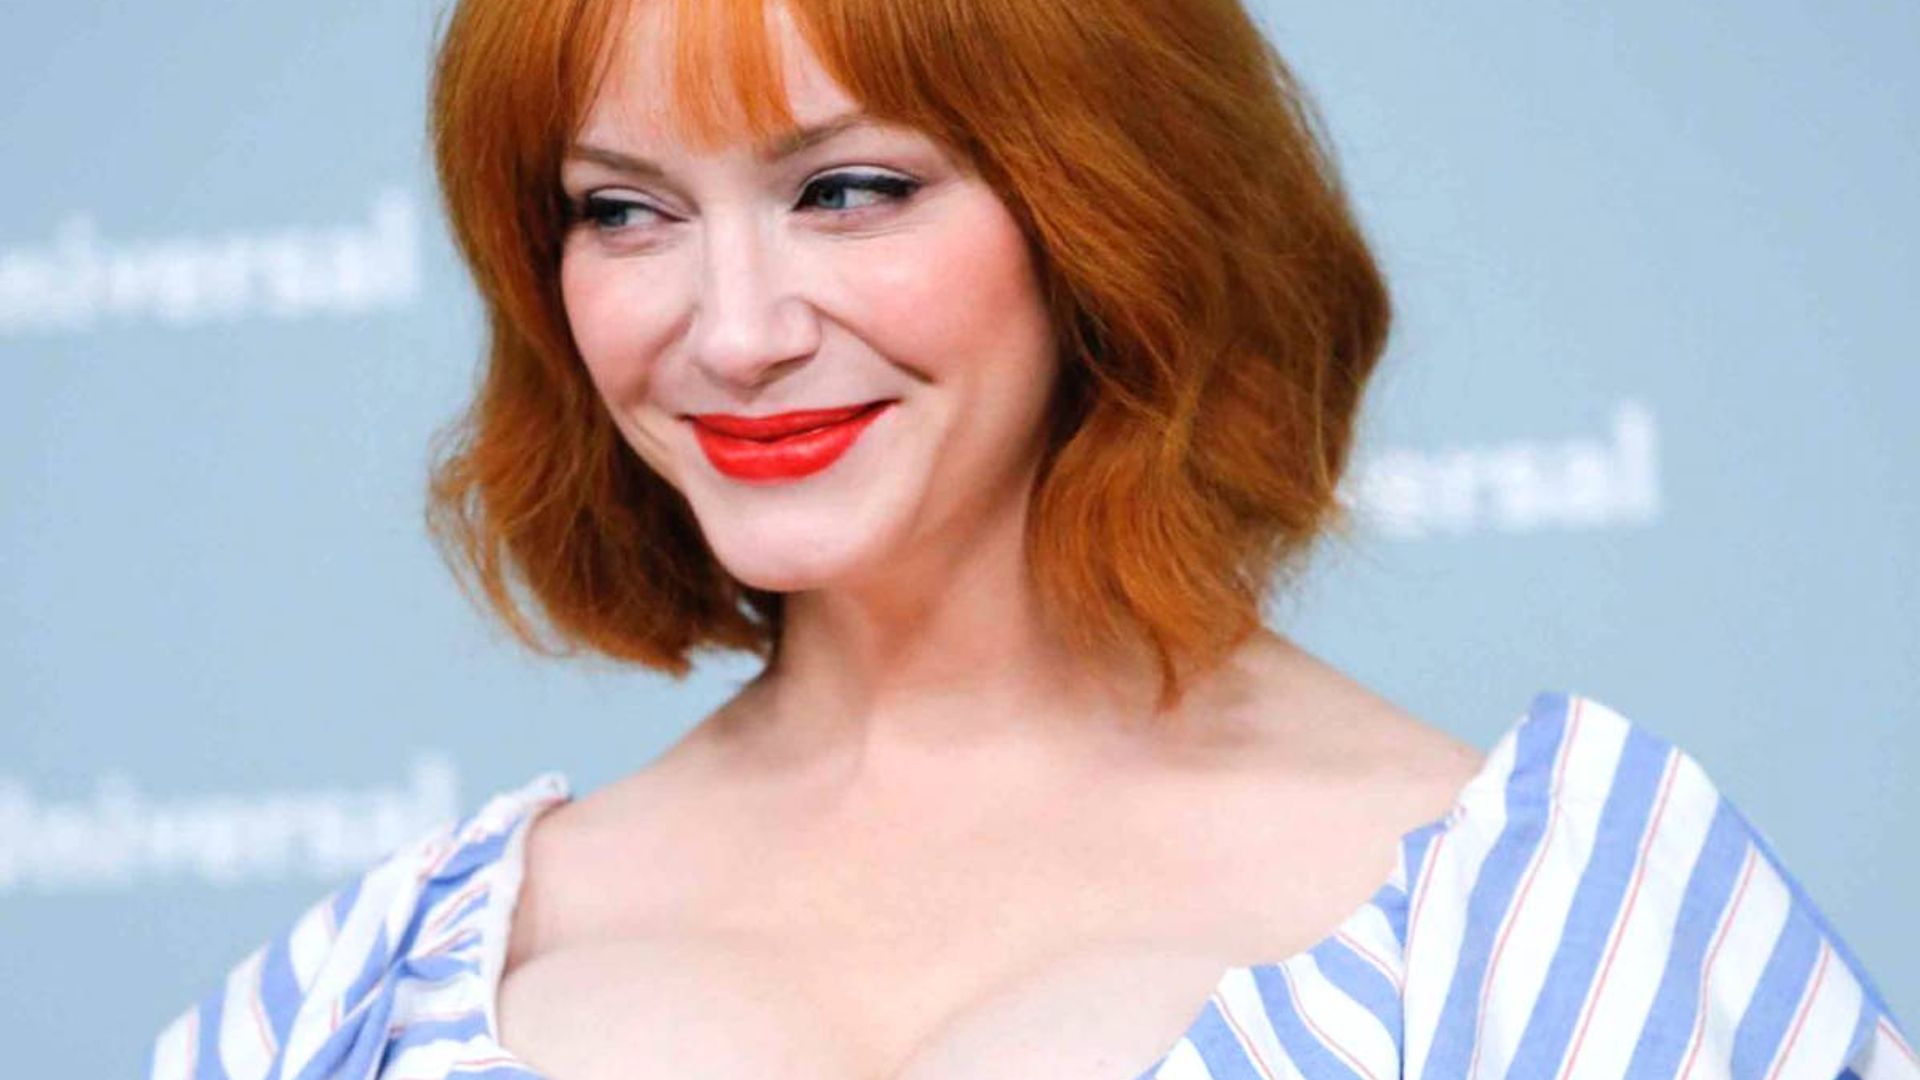 Christina Hendricks posts incredible throwback - and fans can't believe it